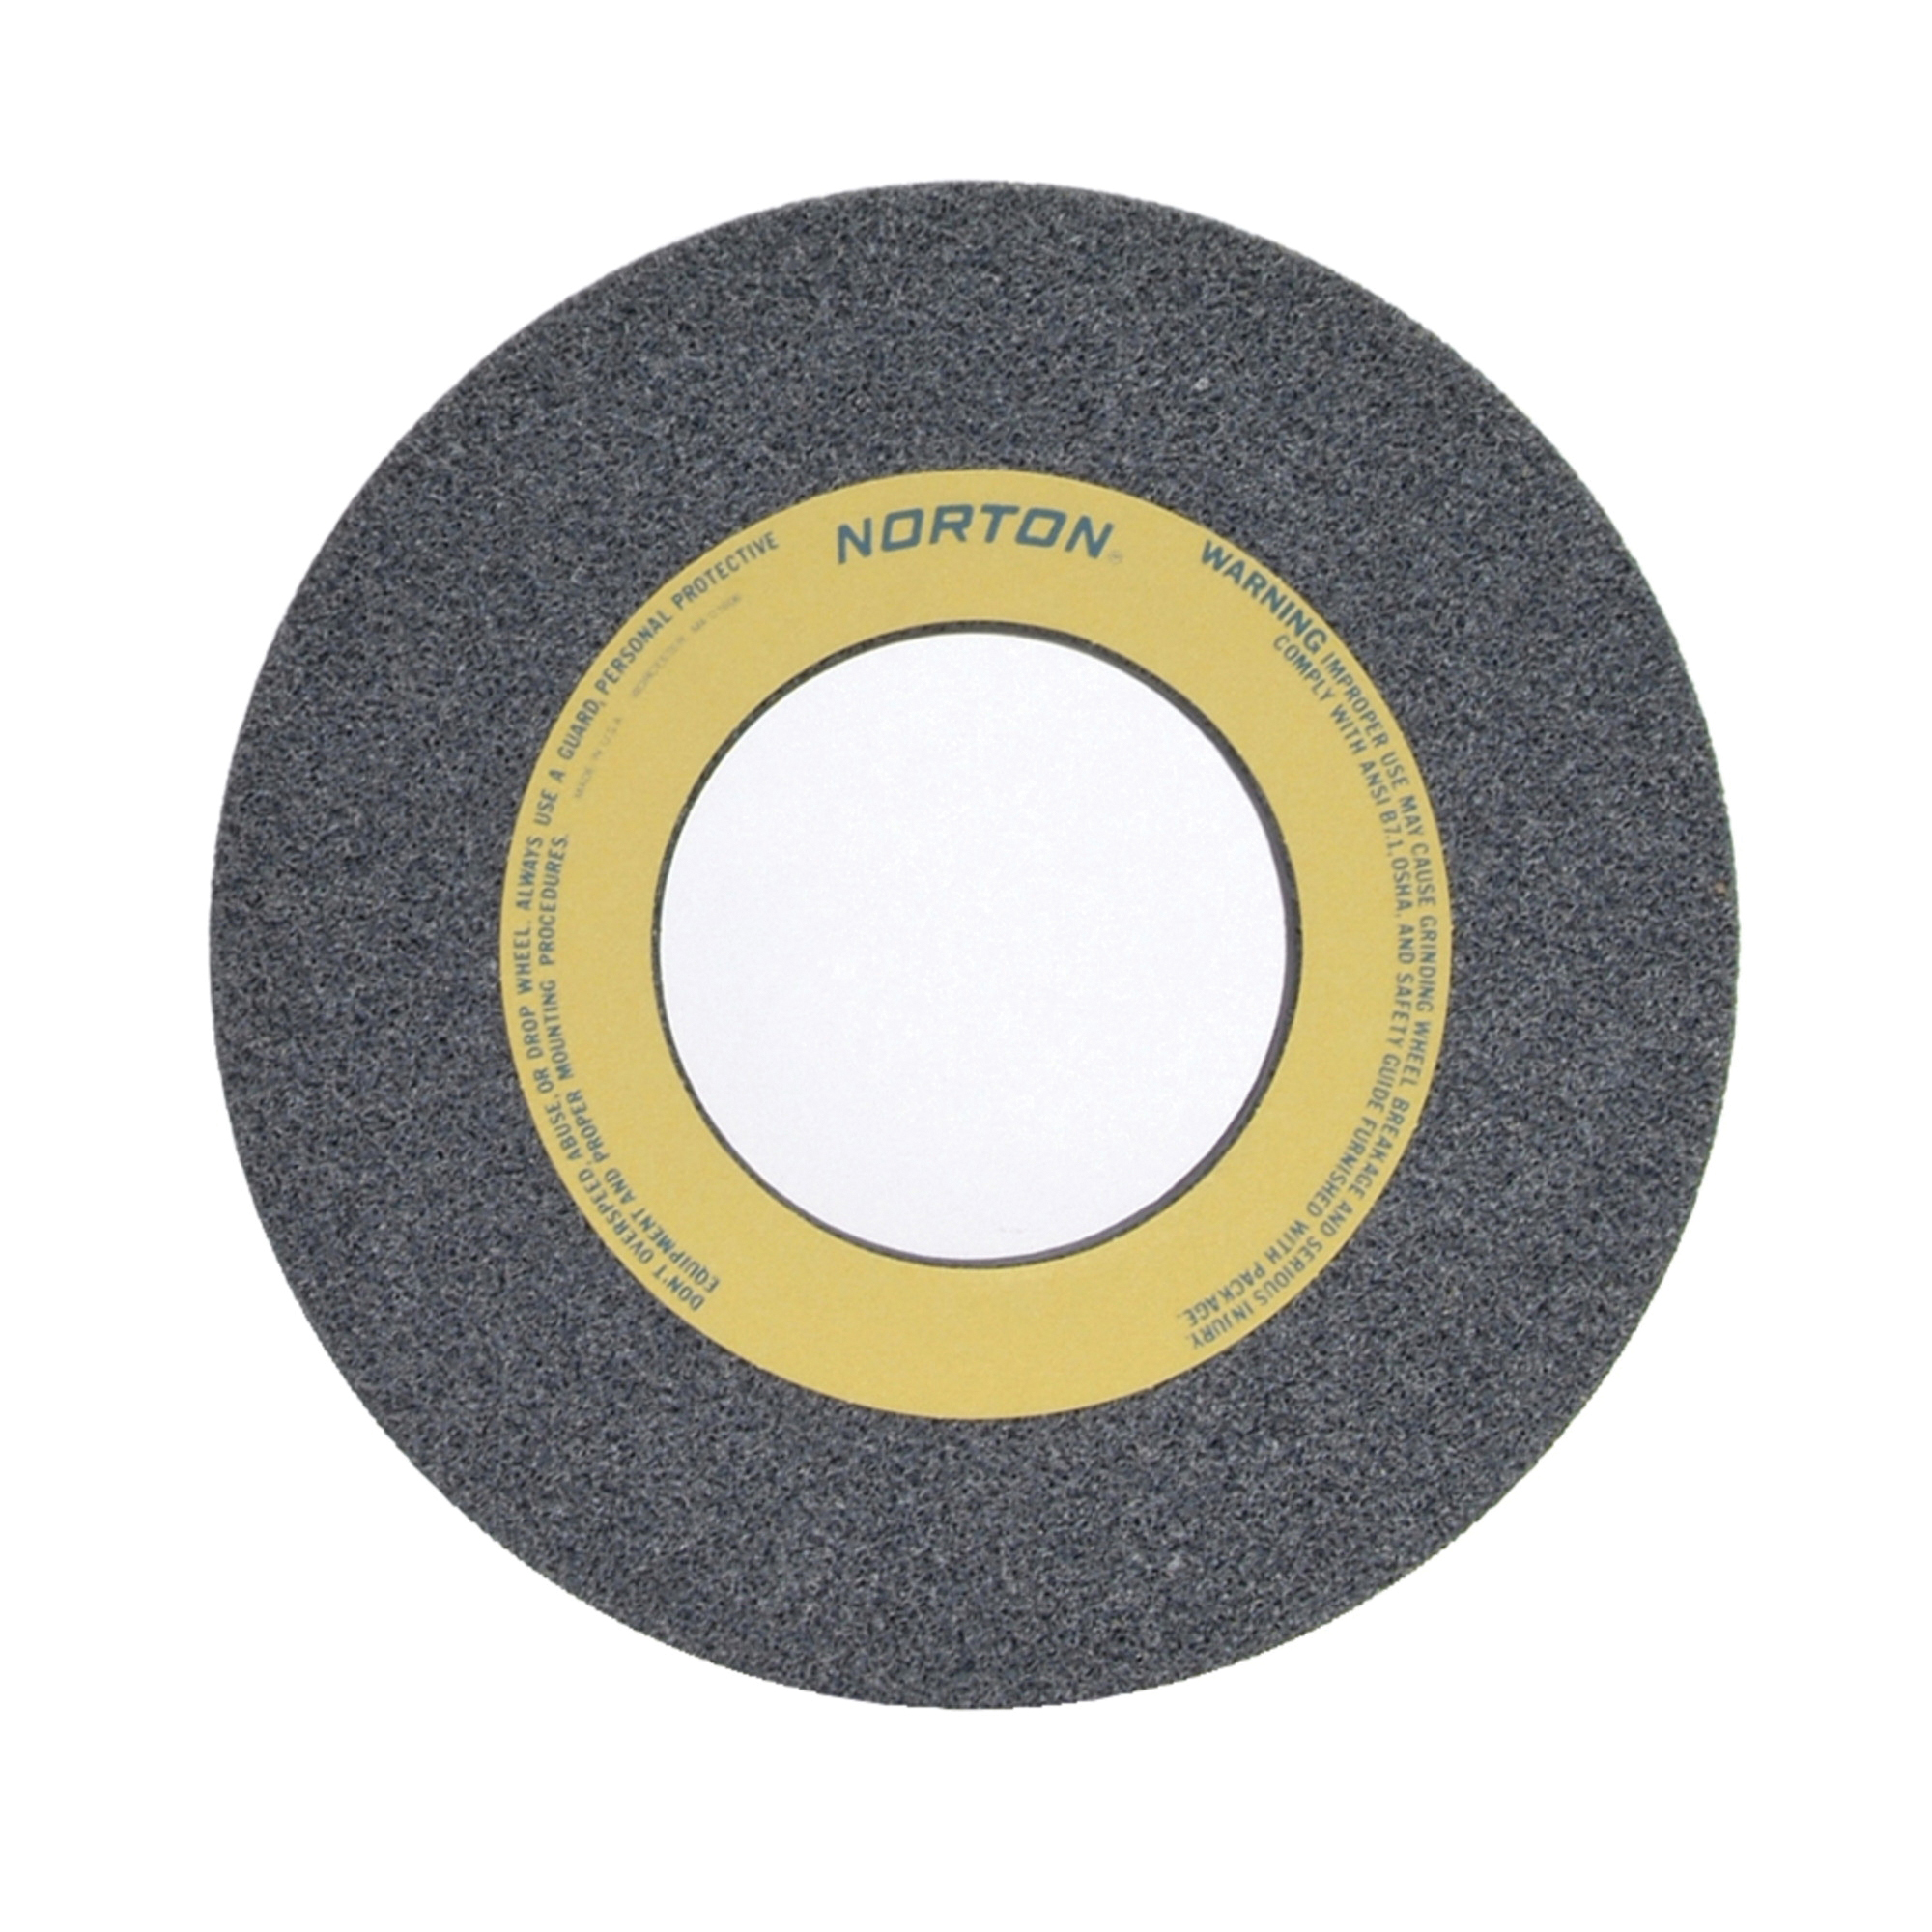 Norton® 66253364238 32A Straight Toolroom Wheel, 14 in Dia x 1-1/2 in THK, 5 in Center Hole, 46 Grit, Aluminum Oxide Abrasive